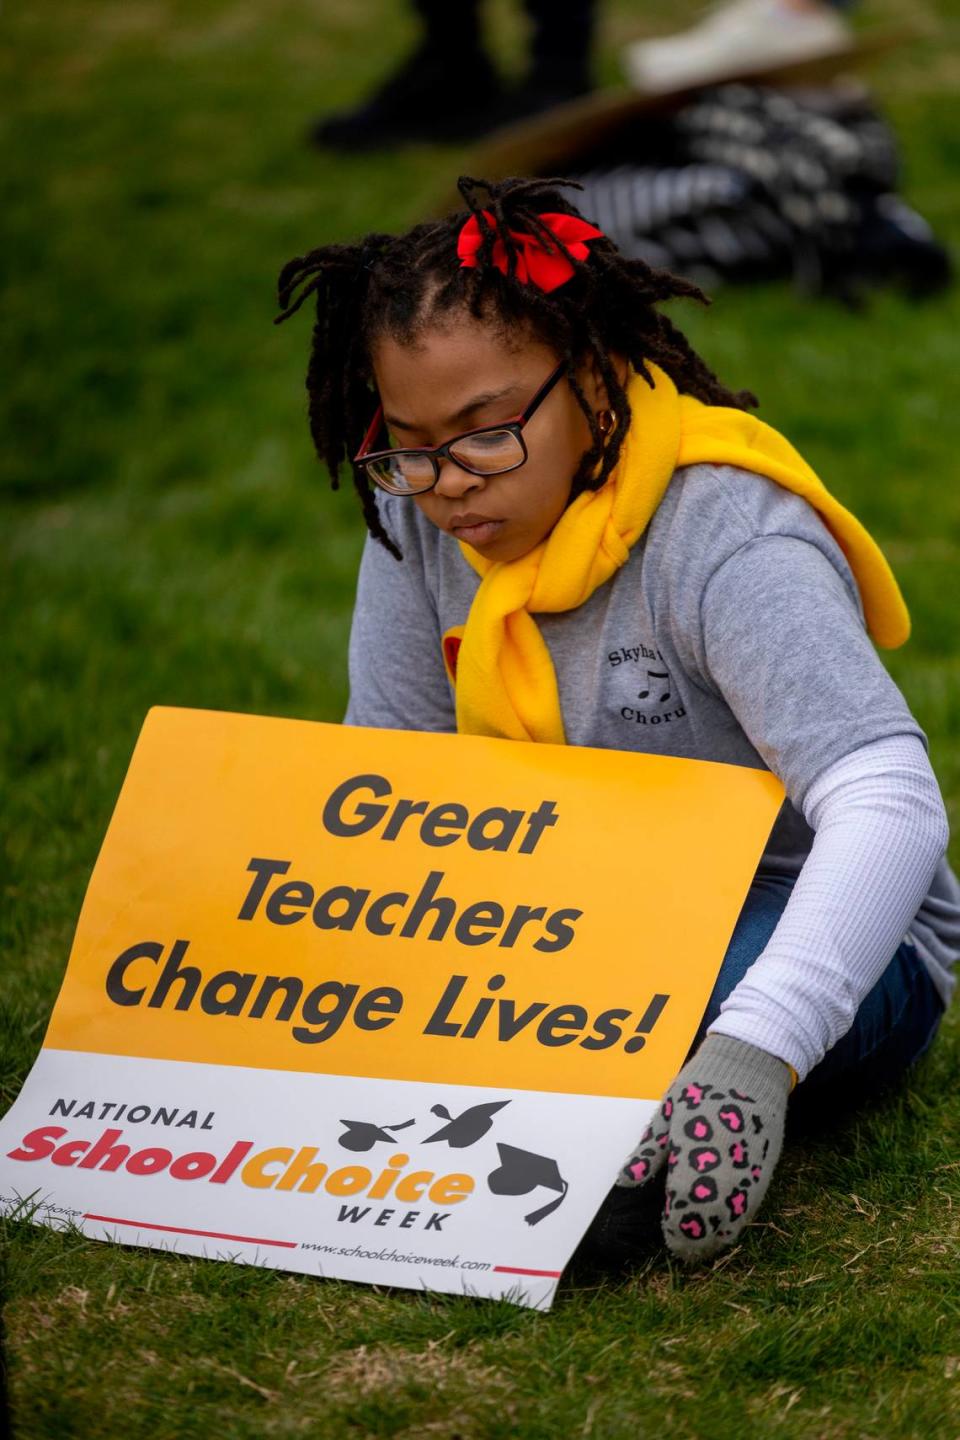 School voucher supporters celebrate National School Choice Week during a rally on Halifax Mall in front of the Legislative Building in Raleigh on Jan. 24. North Carolina could see a 60% increase this year in the number of students receiving a private school voucher now that income limits for families have been removed. Travis Long/tlong@newsobserver.com